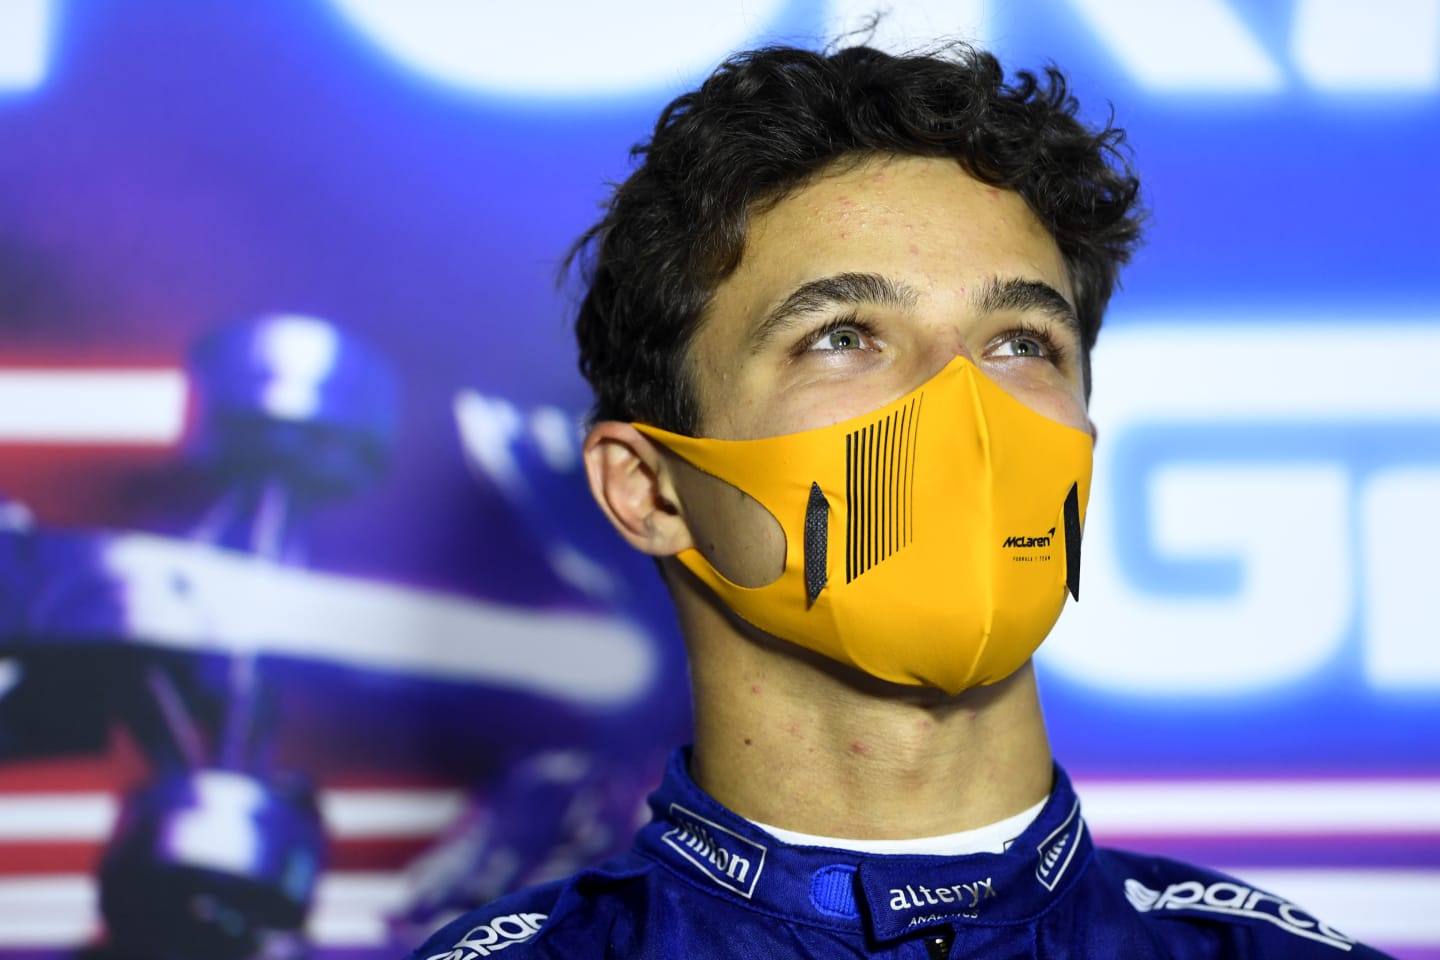 MONZA, ITALY - SEPTEMBER 12: Second placed Lando Norris of Great Britain and McLaren F1 talks in the press conference after the F1 Grand Prix of Italy at Autodromo di Monza on September 12, 2021 in Monza, Italy. (Photo by Rudy Carezzevoli/Getty Images)